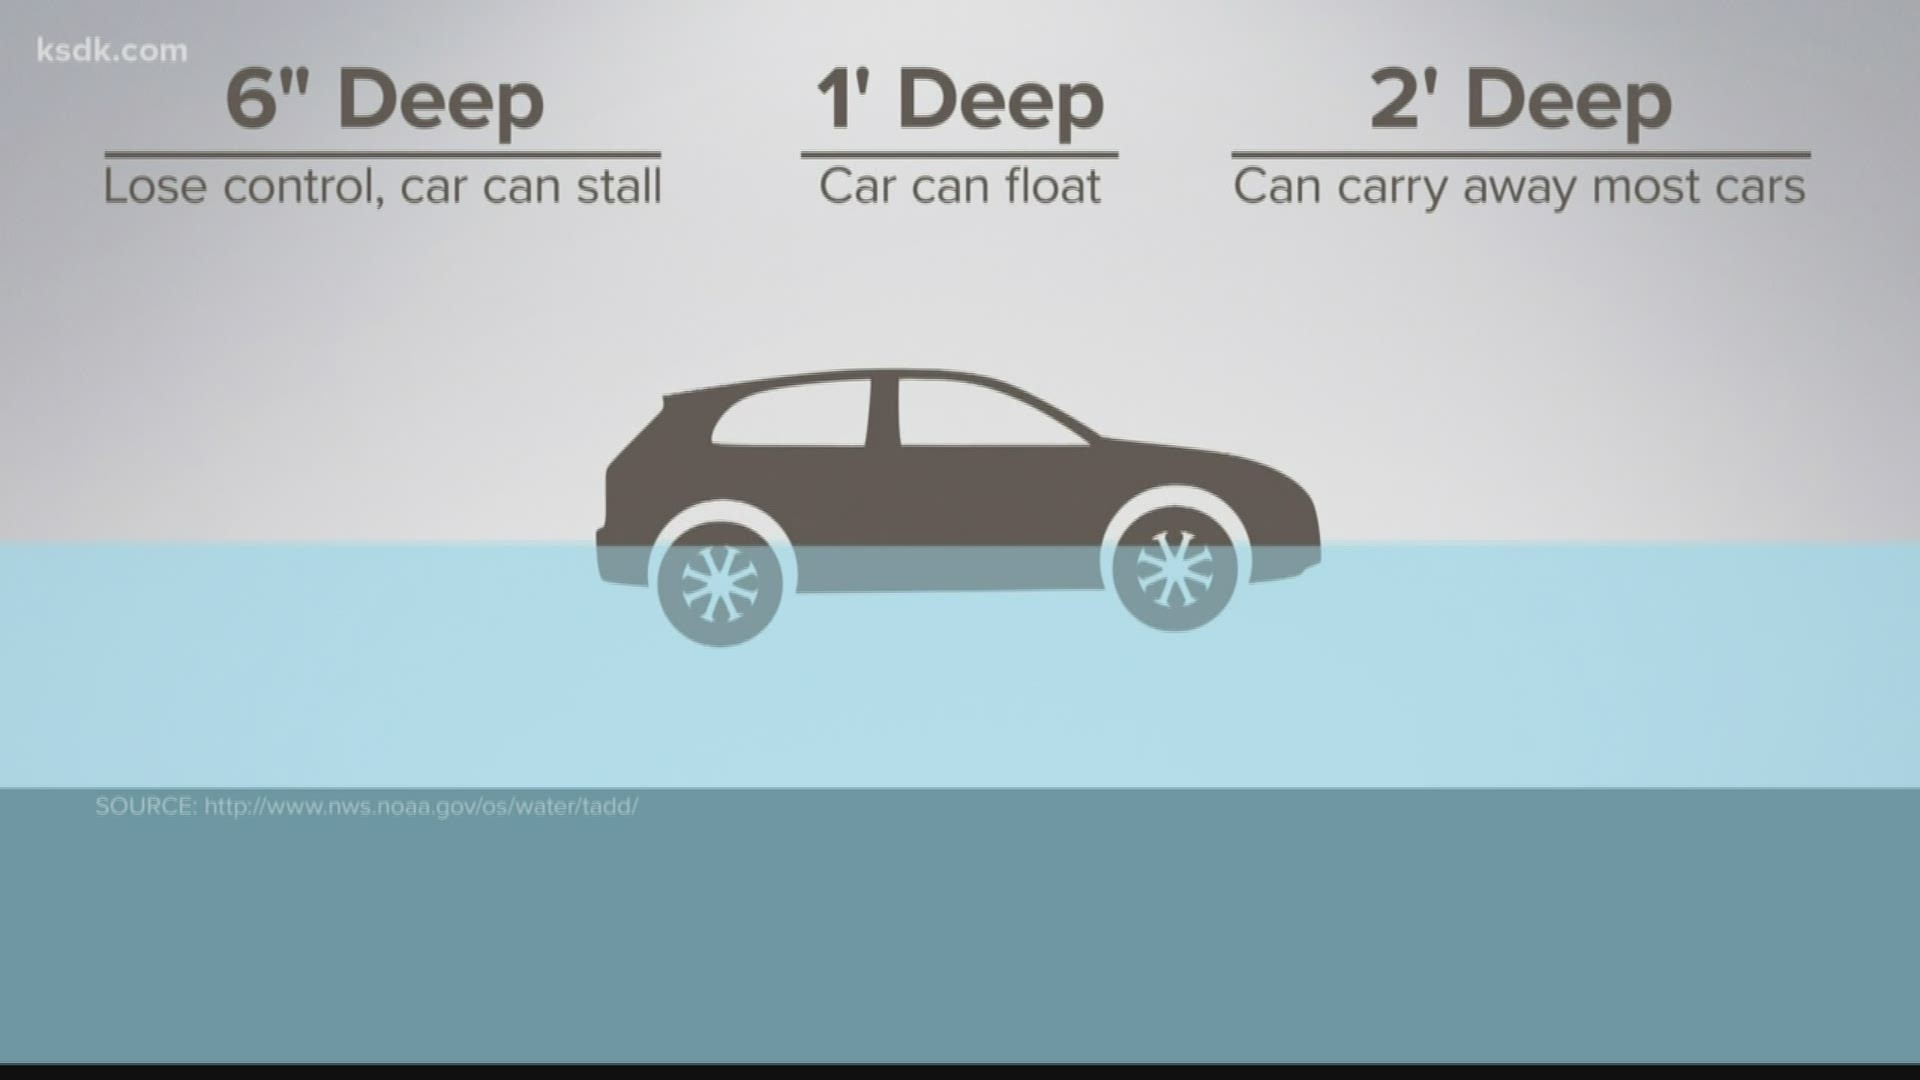 Here are some tips on navigating through wet and water-covered roads.